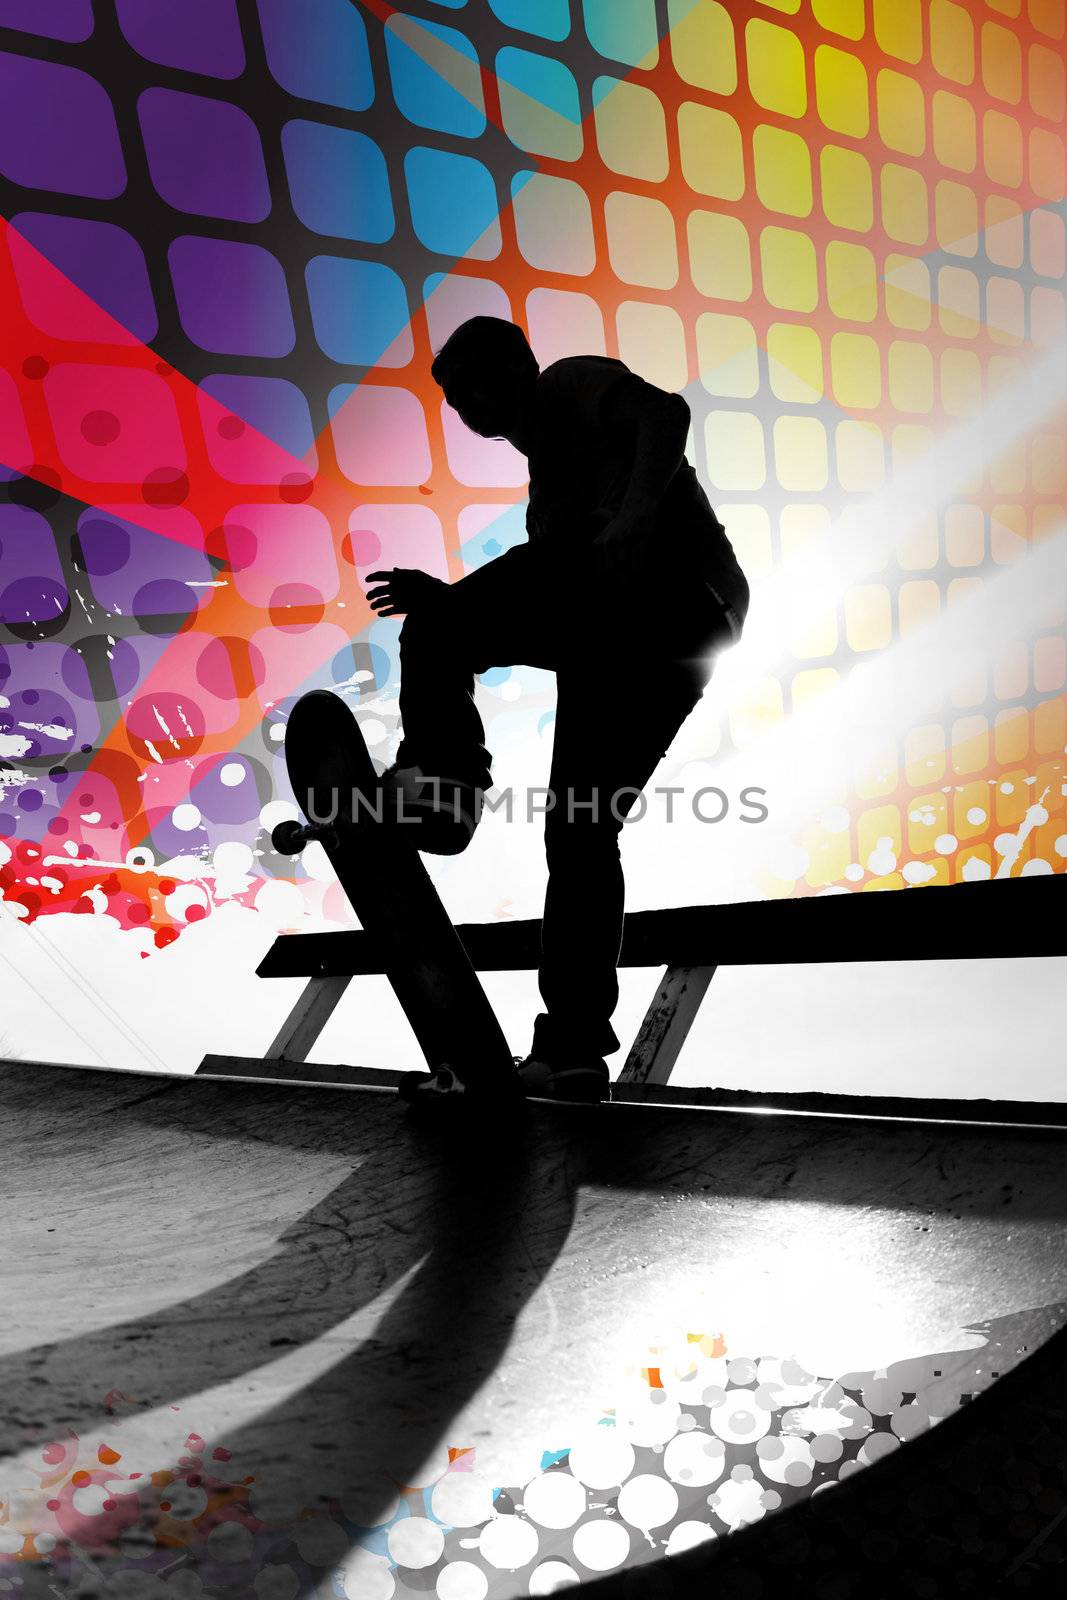 Abstract Skateboarder by graficallyminded